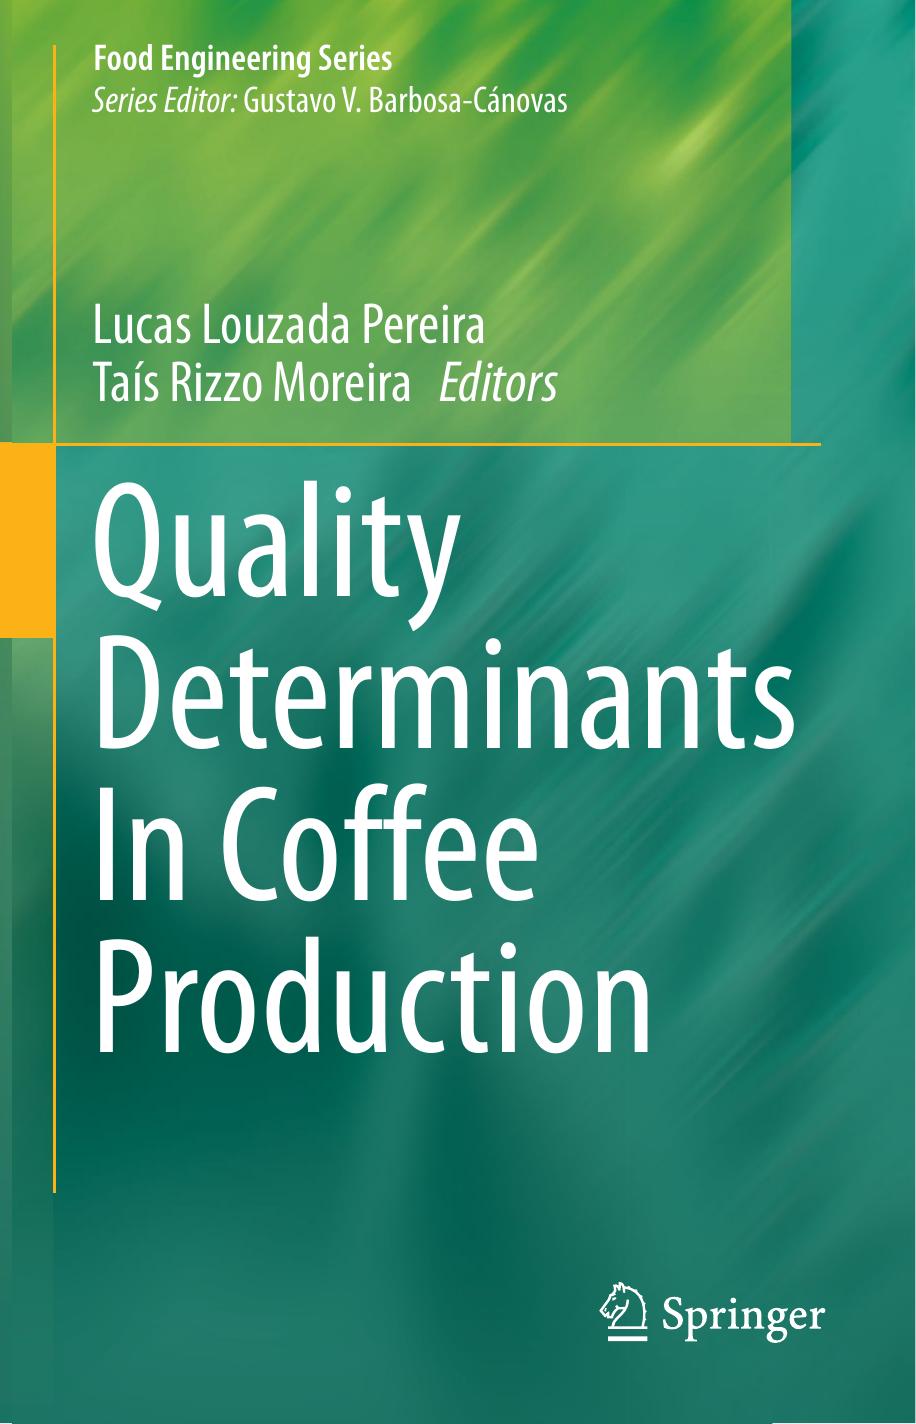 Quality Determinants In Coffee Production-Springer (2022)